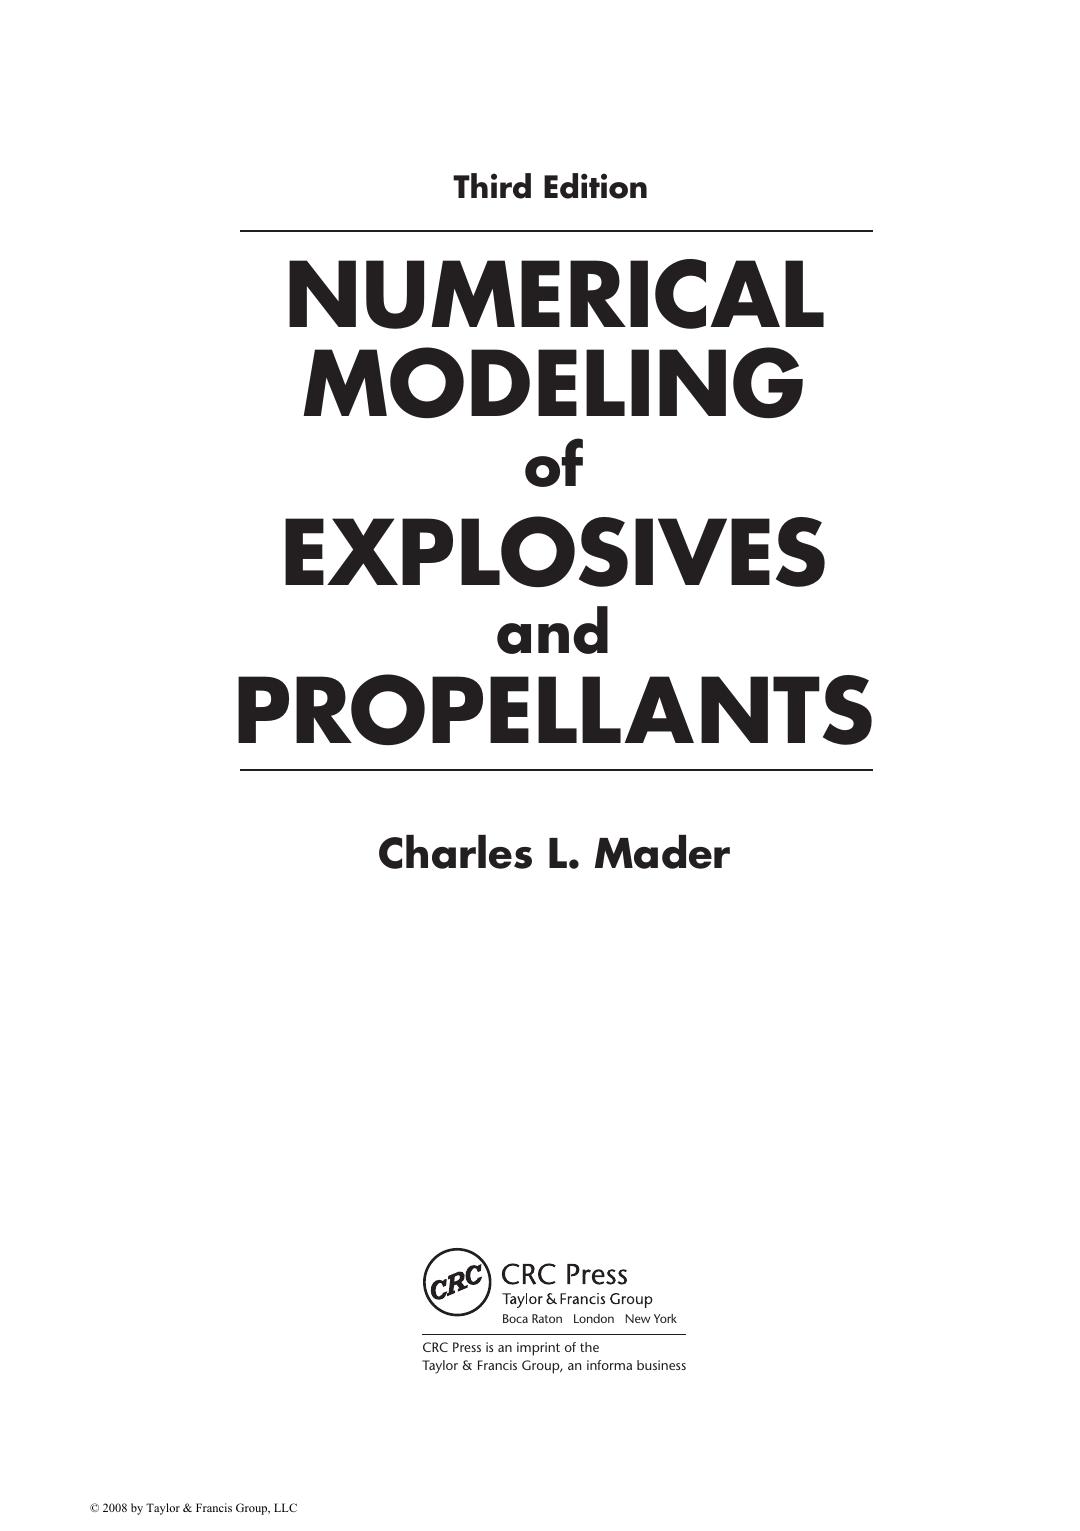 NUMERICAL MODELING of EXPLOSIVES and PROPELLANTS, Third Edition